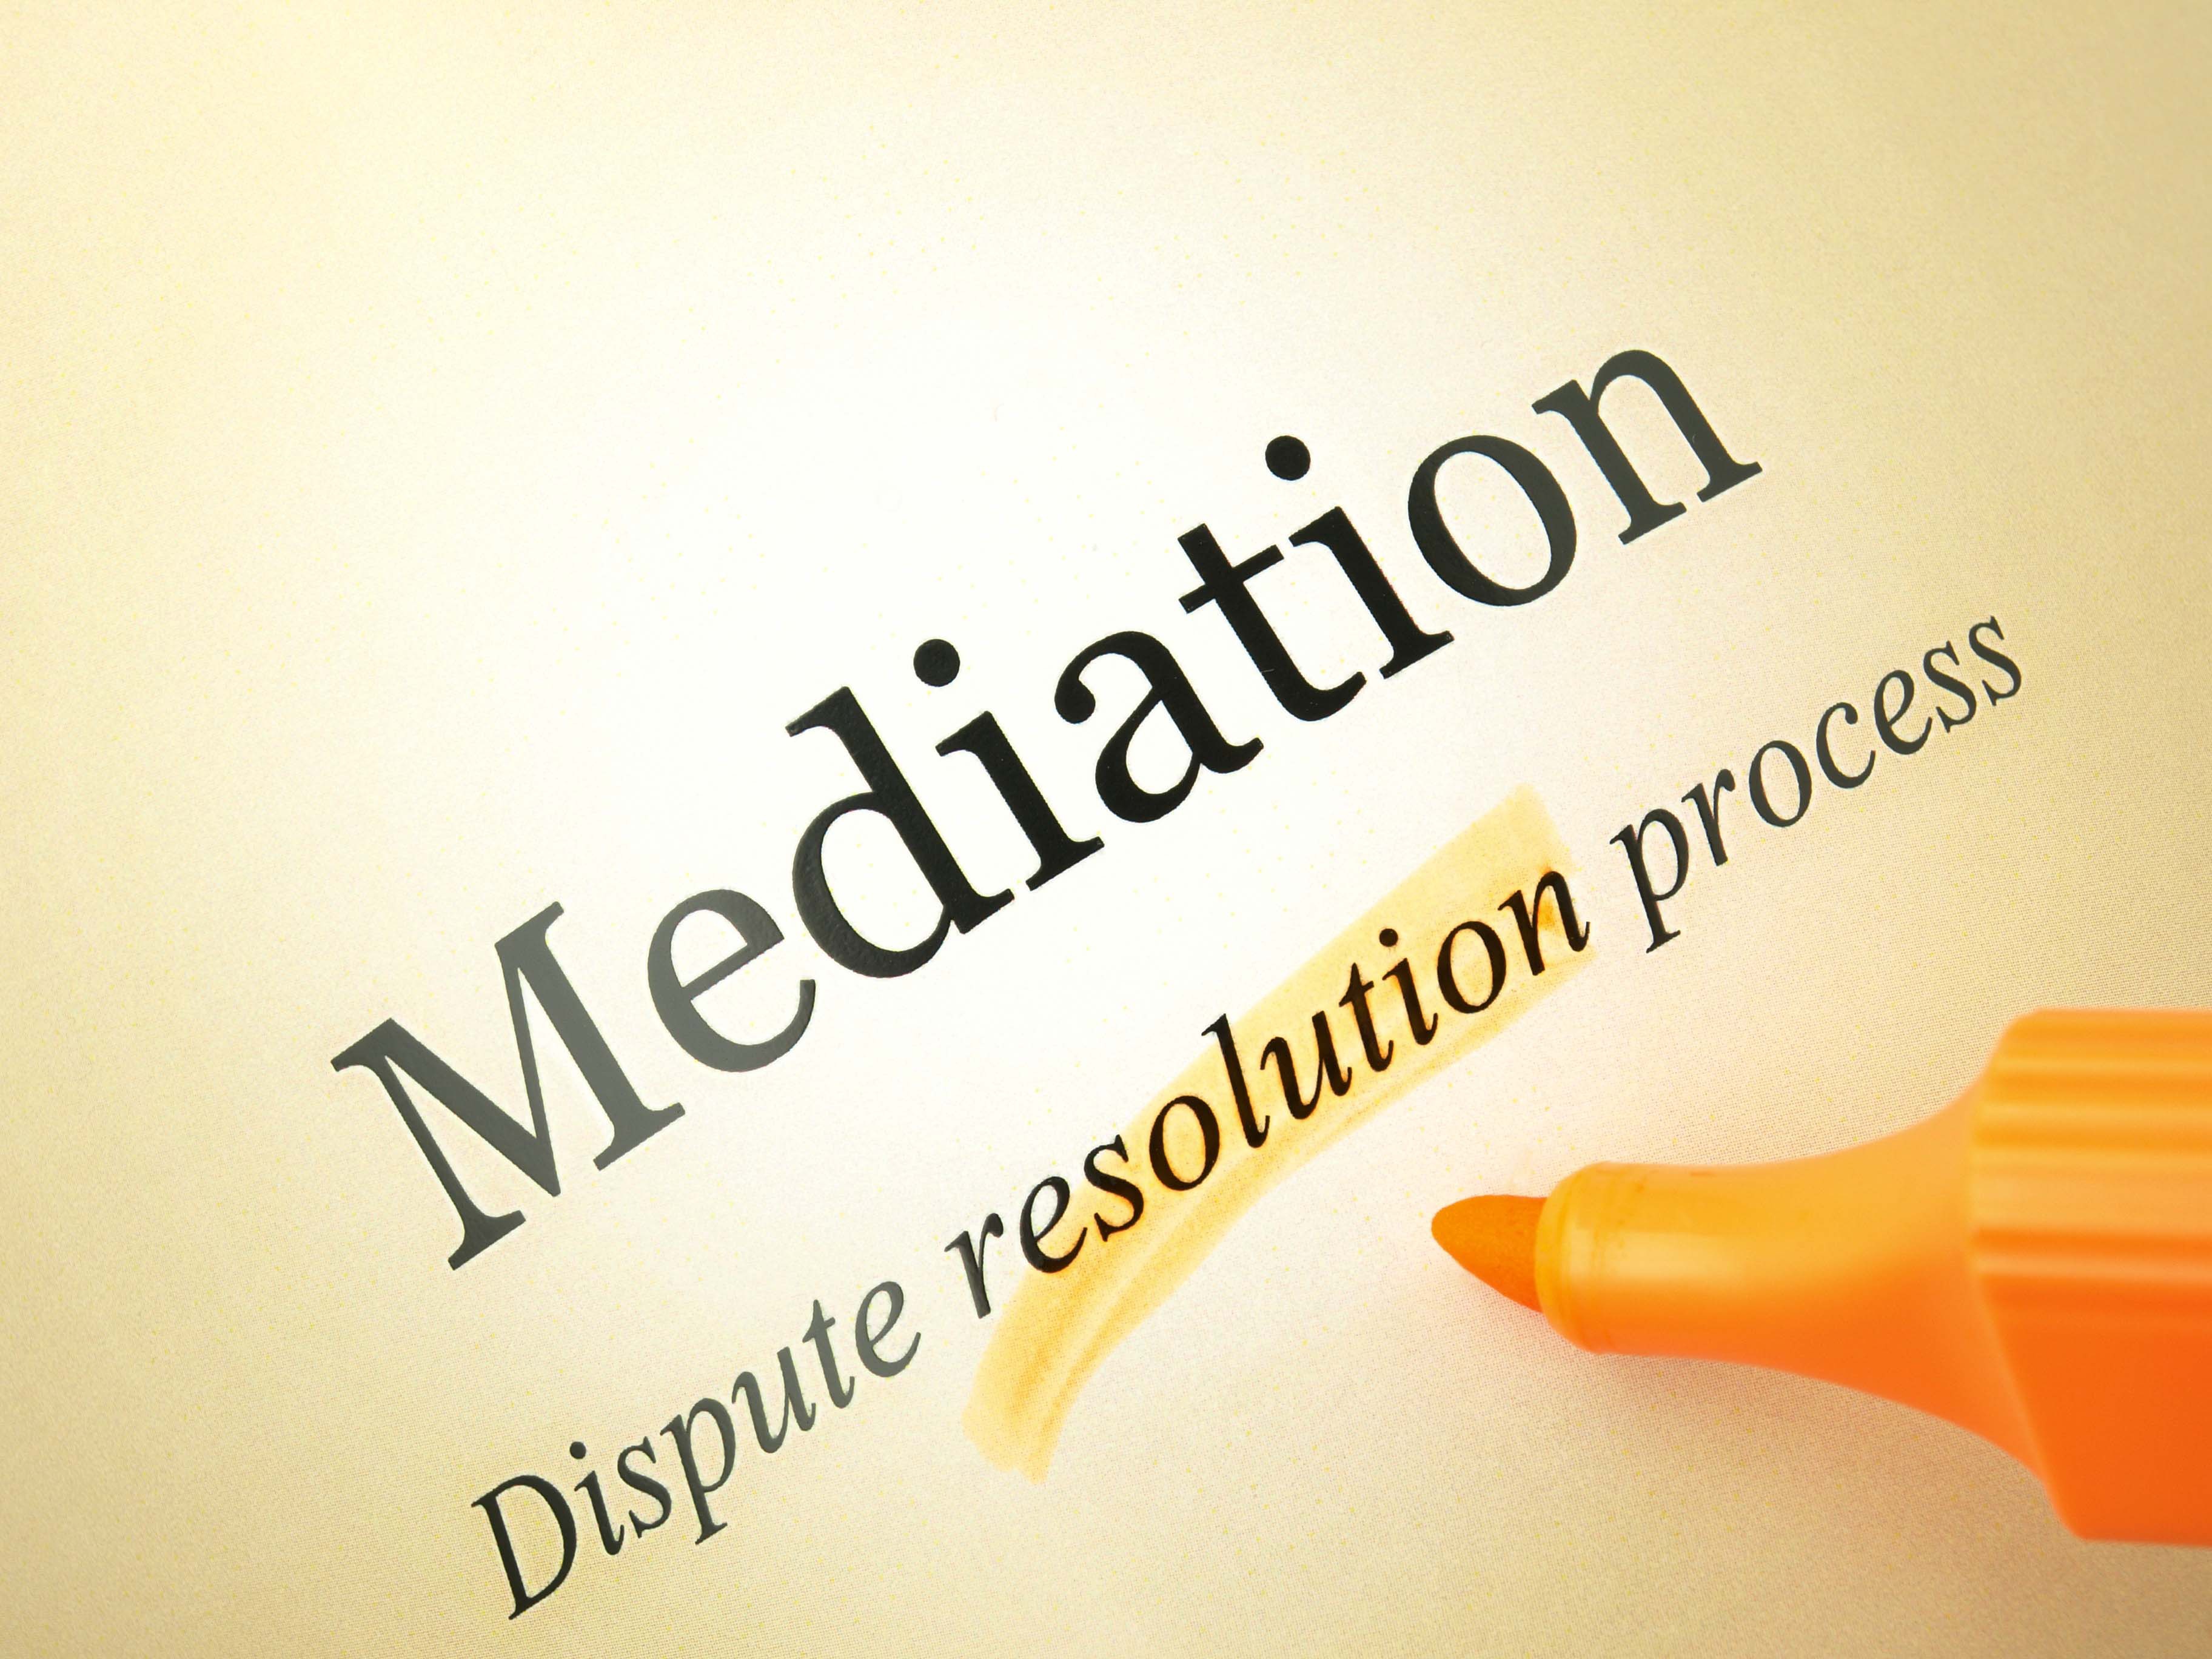 http://guidenconsulting.com/wp-content/uploads/2016/10/mediation-definition1.jpg